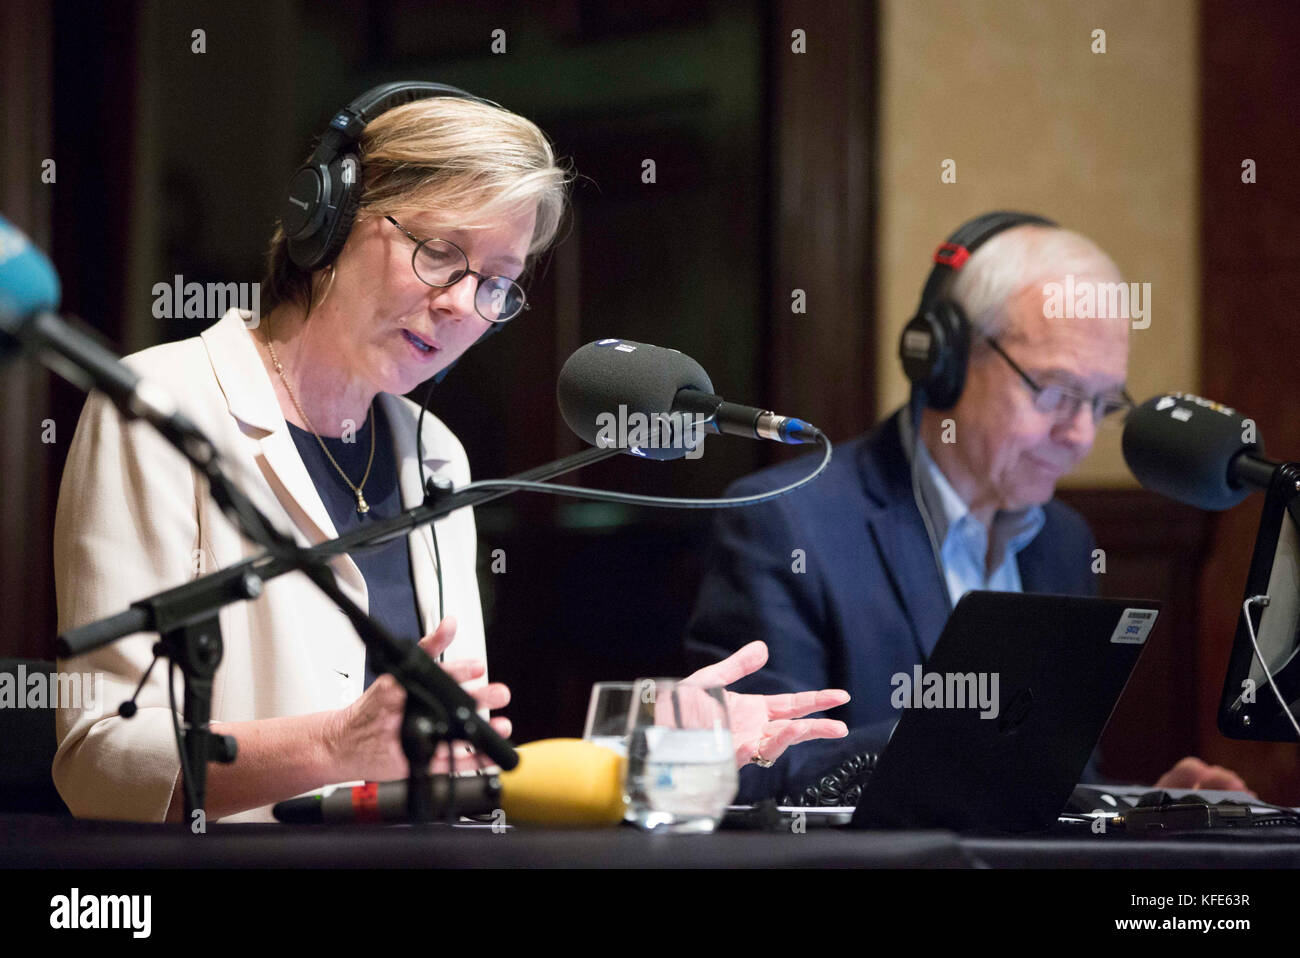 BBC Radio 4 Today presenters Sarah Montague and John Humphrys broadcast today's Today programme at Wigmore Hall in central London as the BBC Radio 4 Today programme celebrates its 60th anniversary. Stock Photo